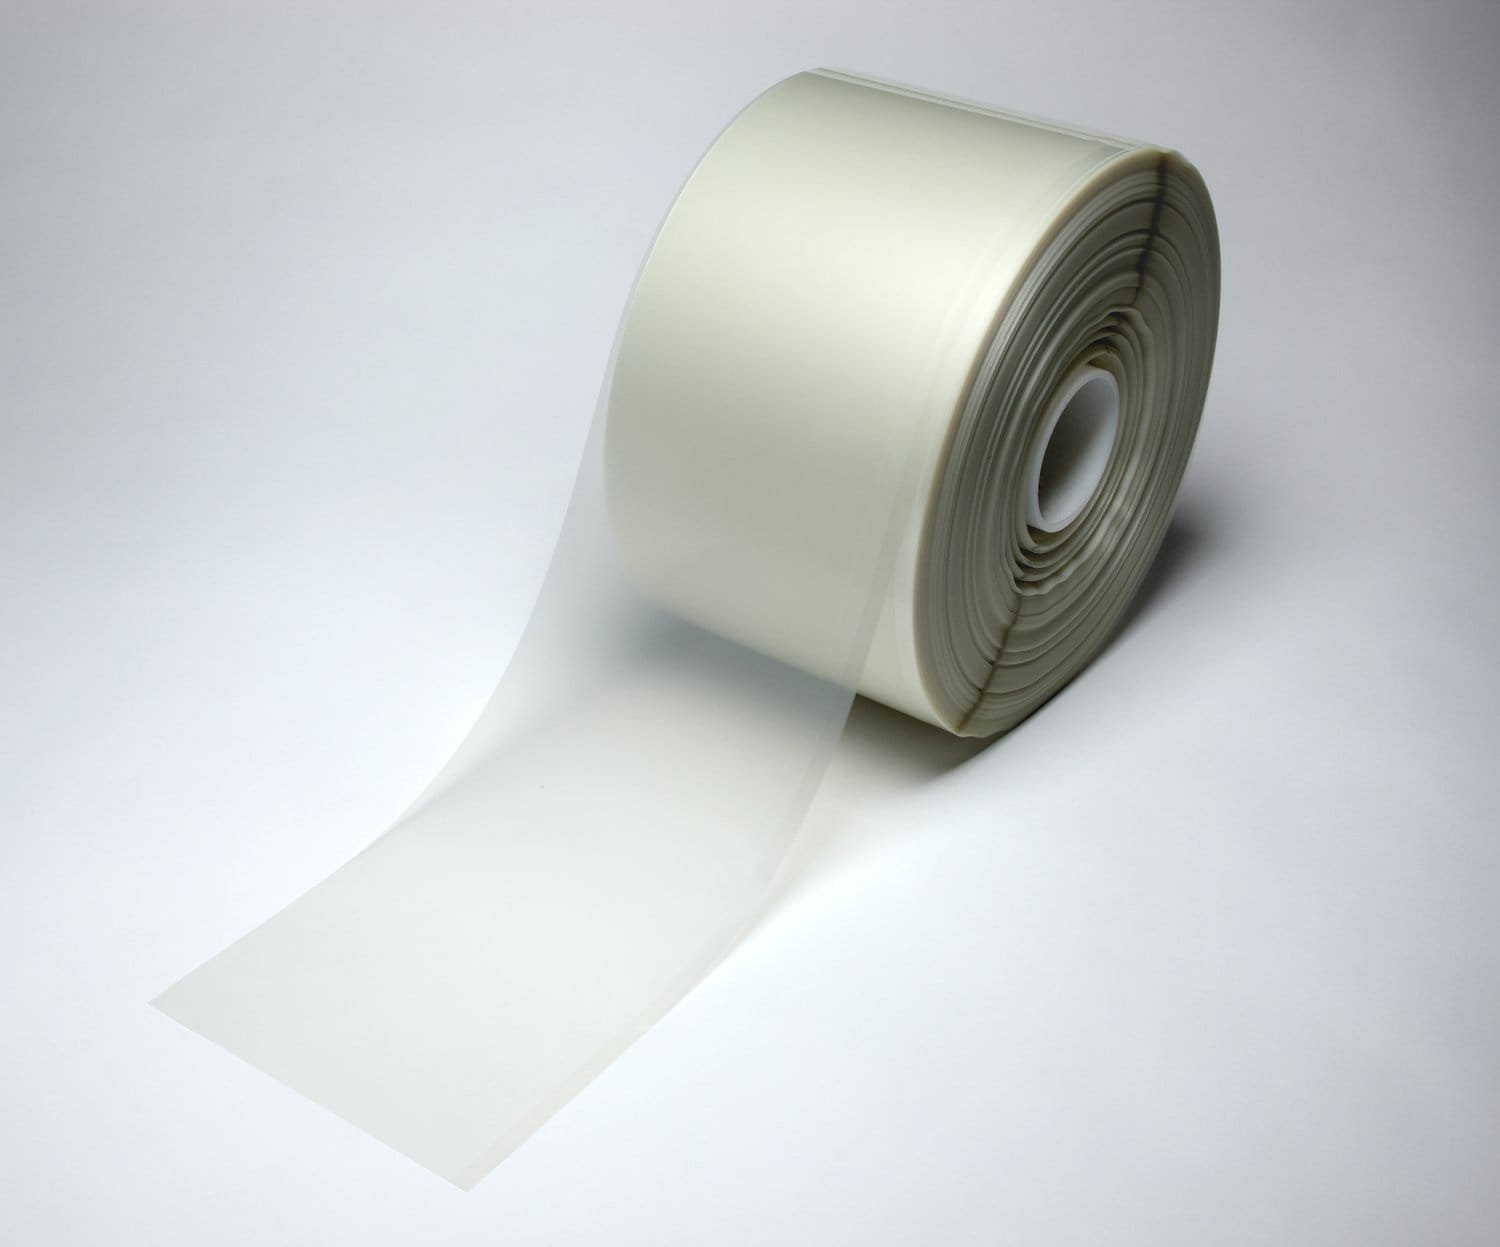 7010535534 - 3M Optically Clear Adhesive 9483, 11.75 in x 180 yds